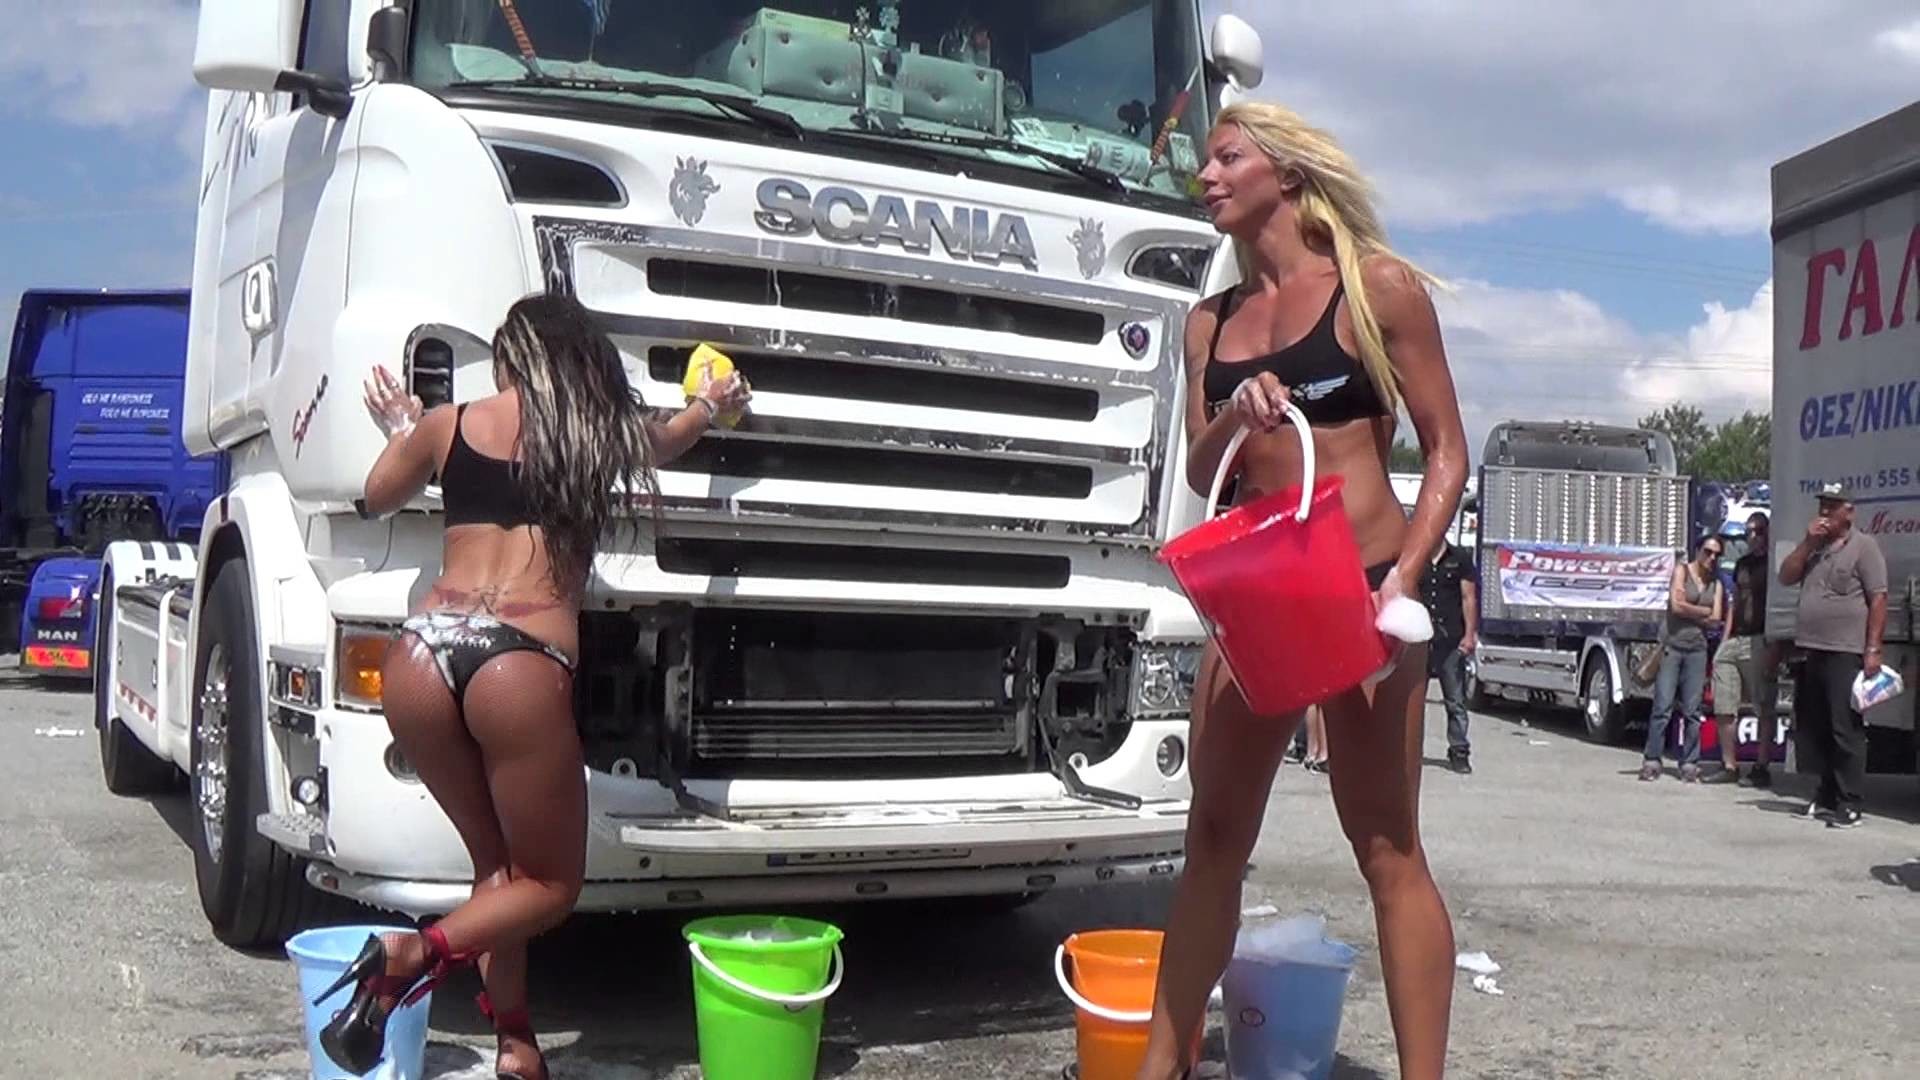 1920x1080 Truck Wash-Gikas Scania! (the brunette girl is really cute & sexy)